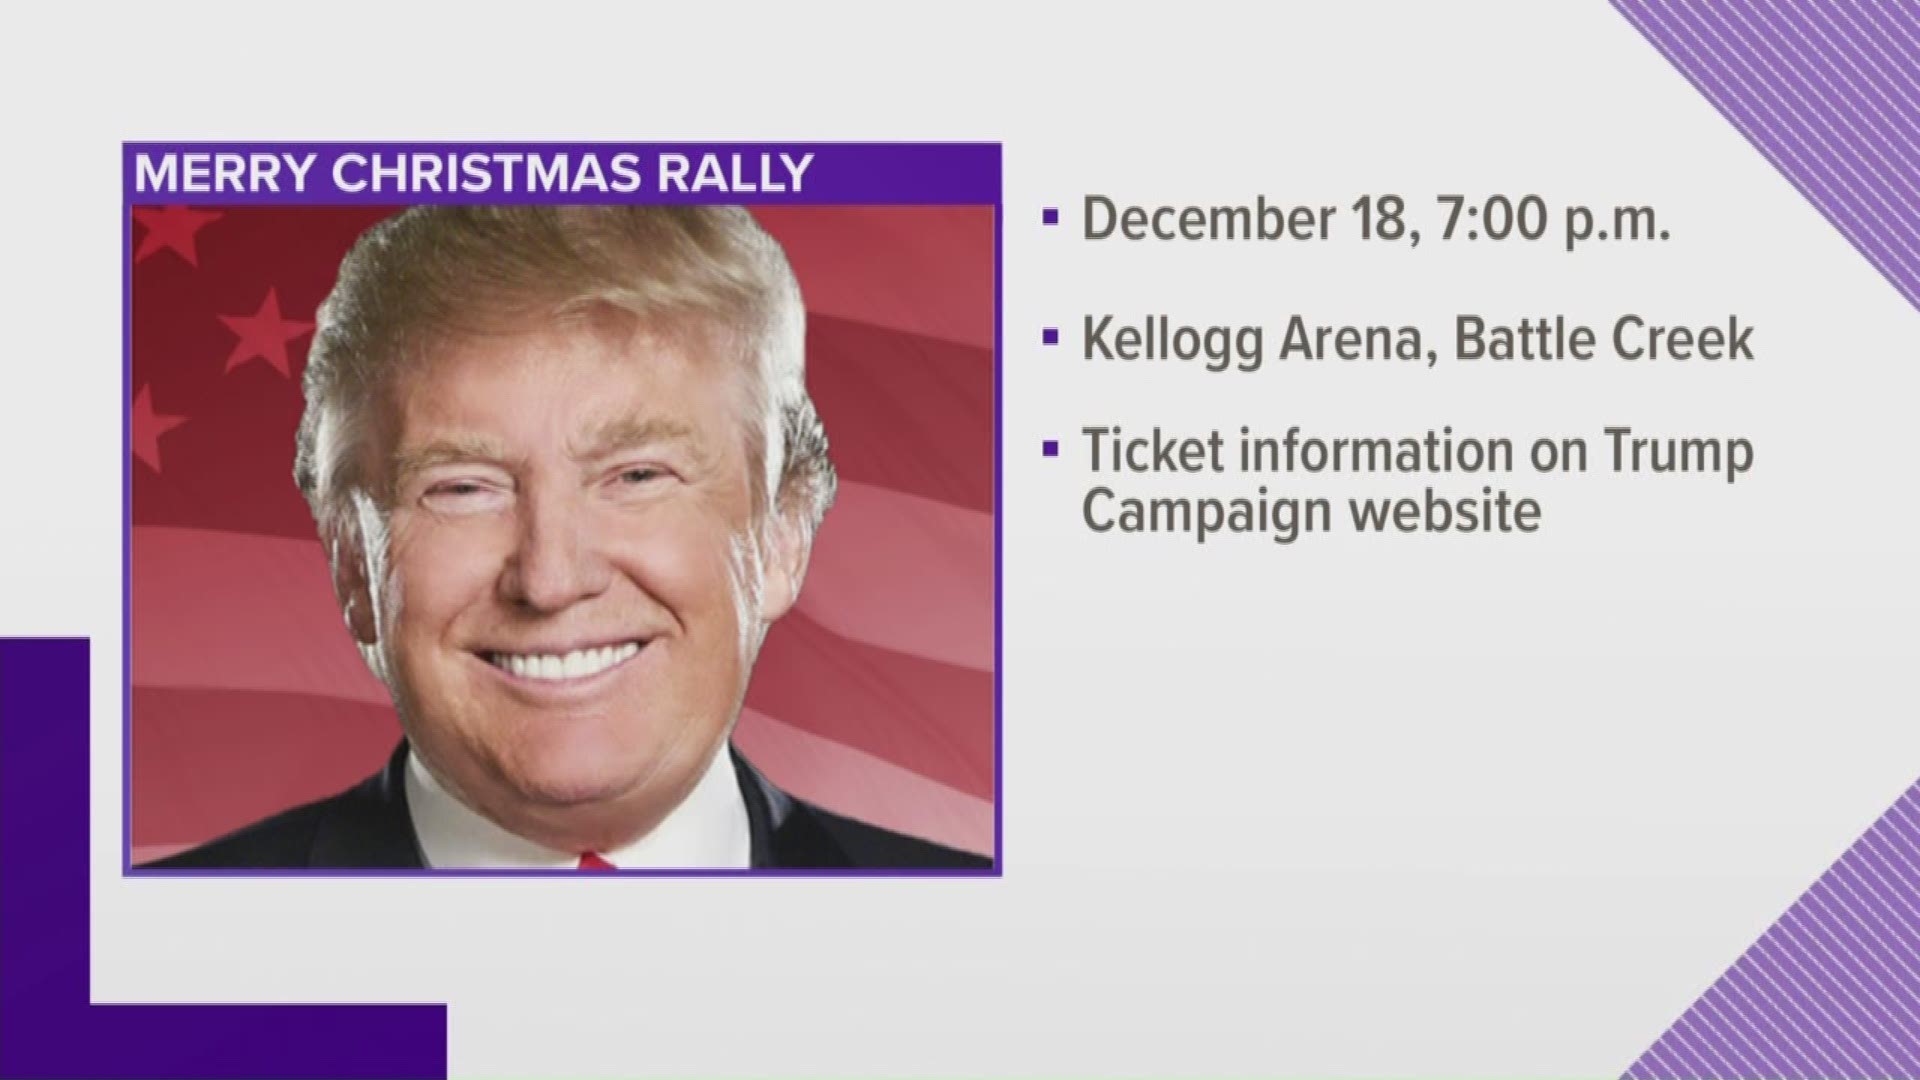 He will hold a "Merry Christmas" rally on Wednesday, Dec. 18 at the Kellogg Arena.